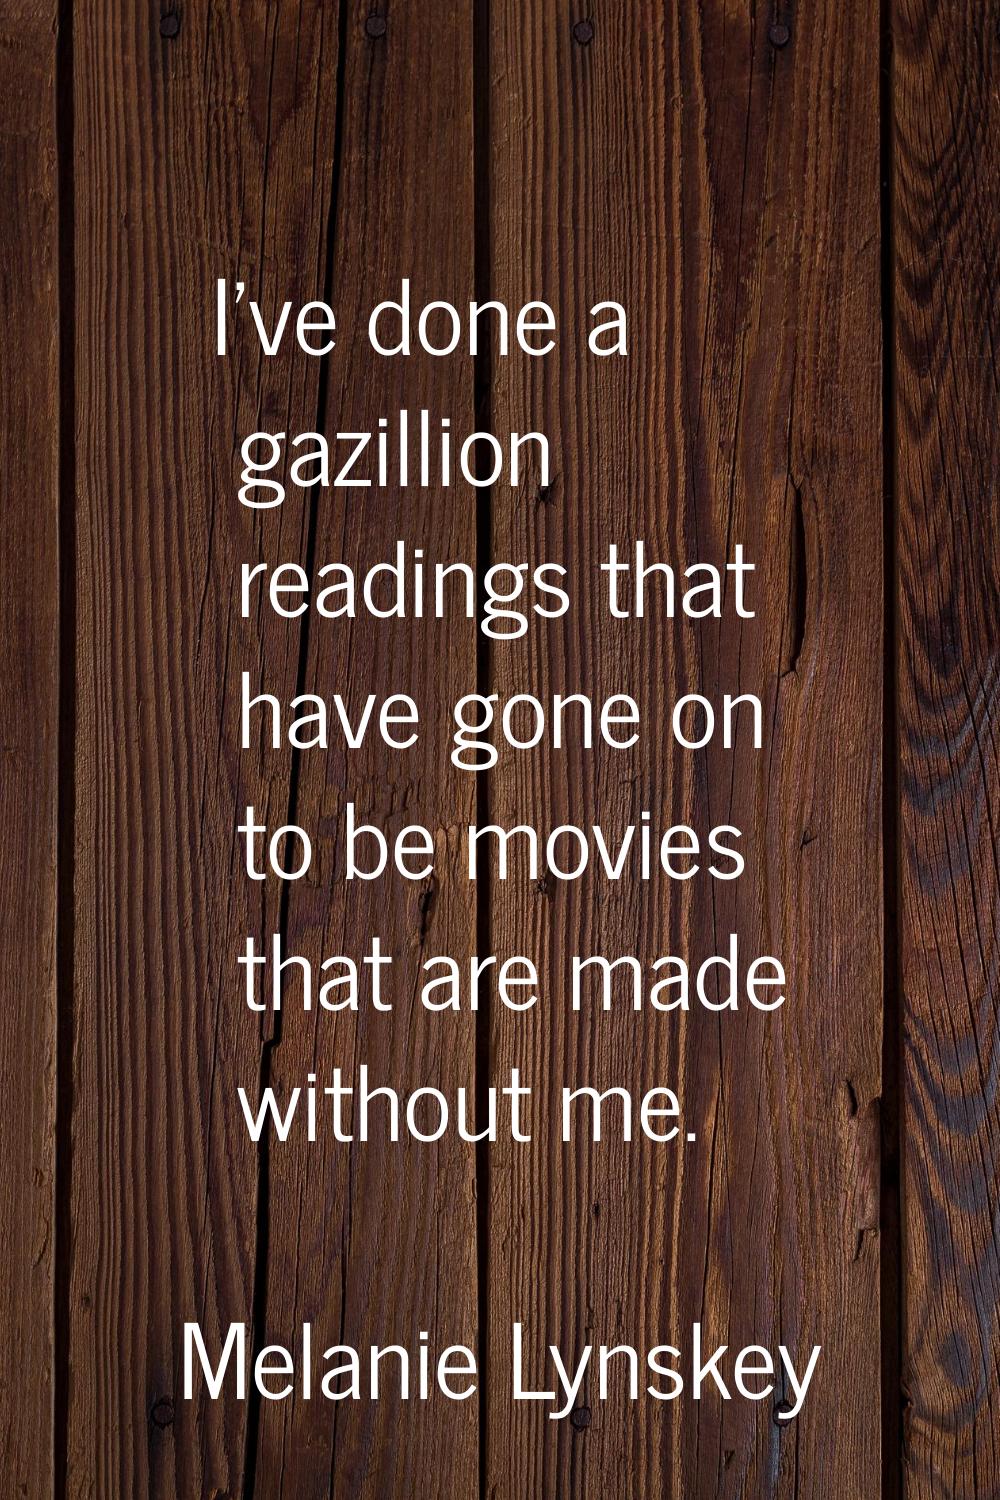 I've done a gazillion readings that have gone on to be movies that are made without me.